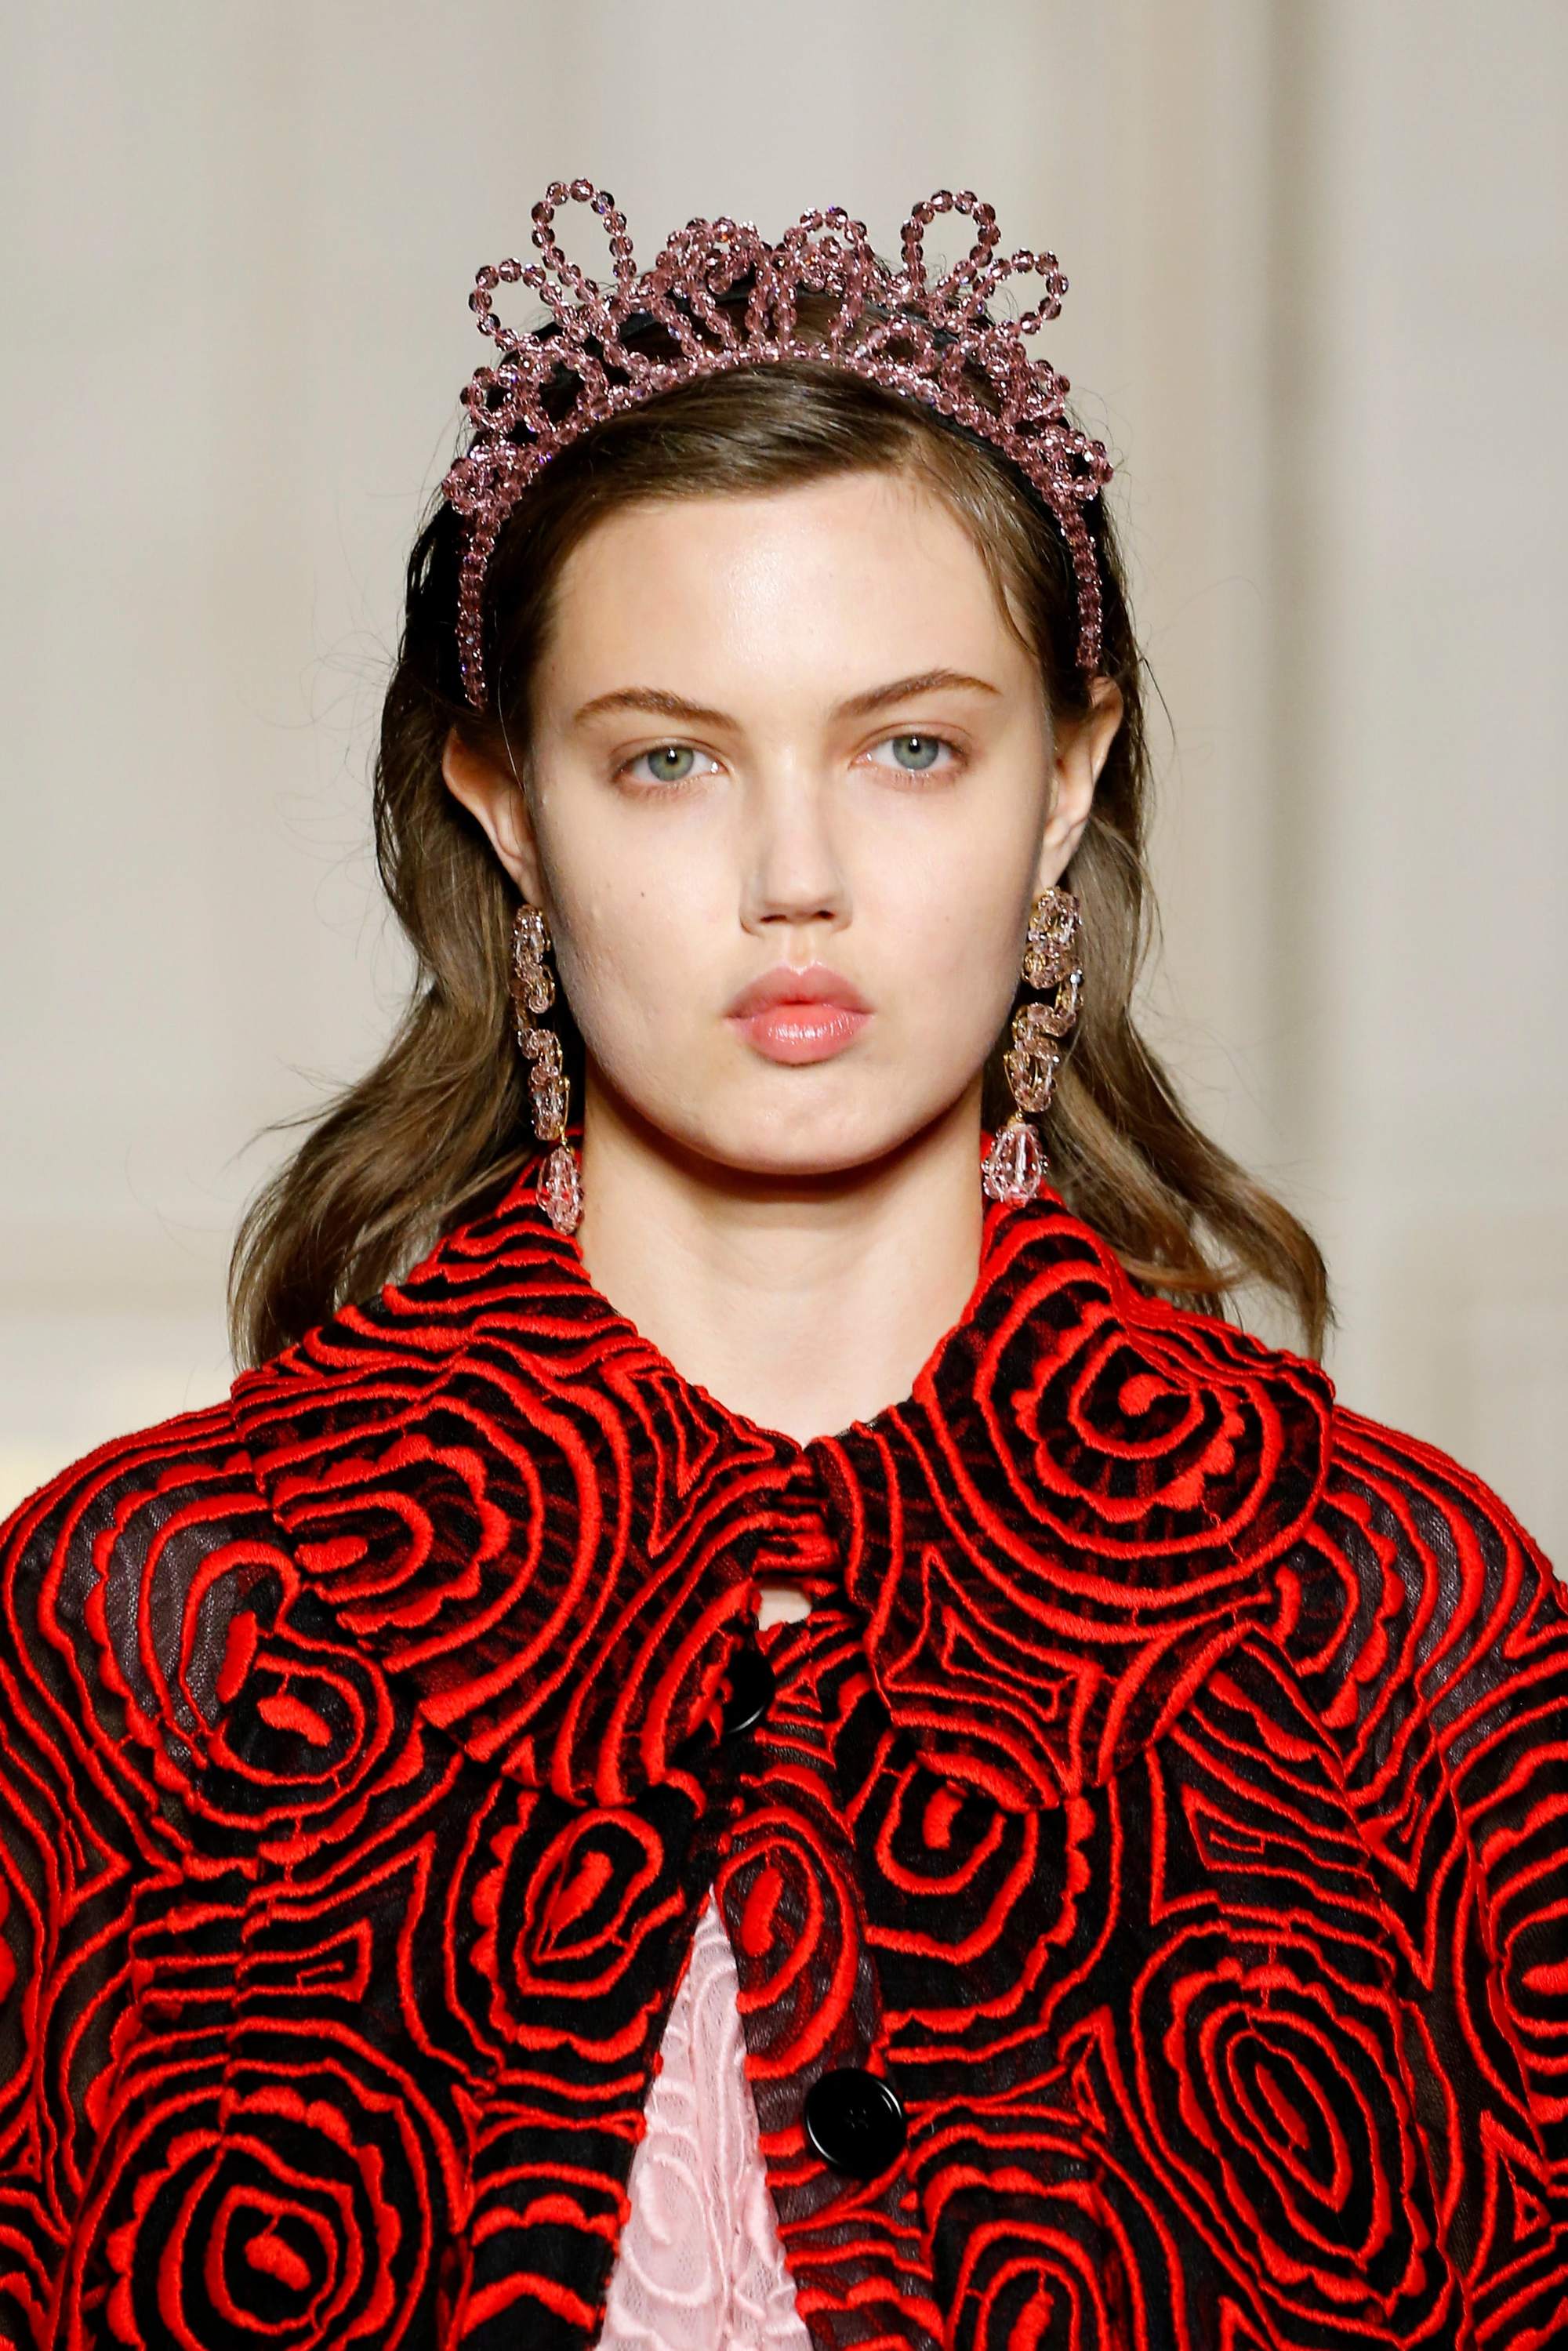 London Fashion Week AW19: Model at Simone Rocha with wavy brunette hair wearing a pink beaded headband in the shape of a tiara, wearing a red coat